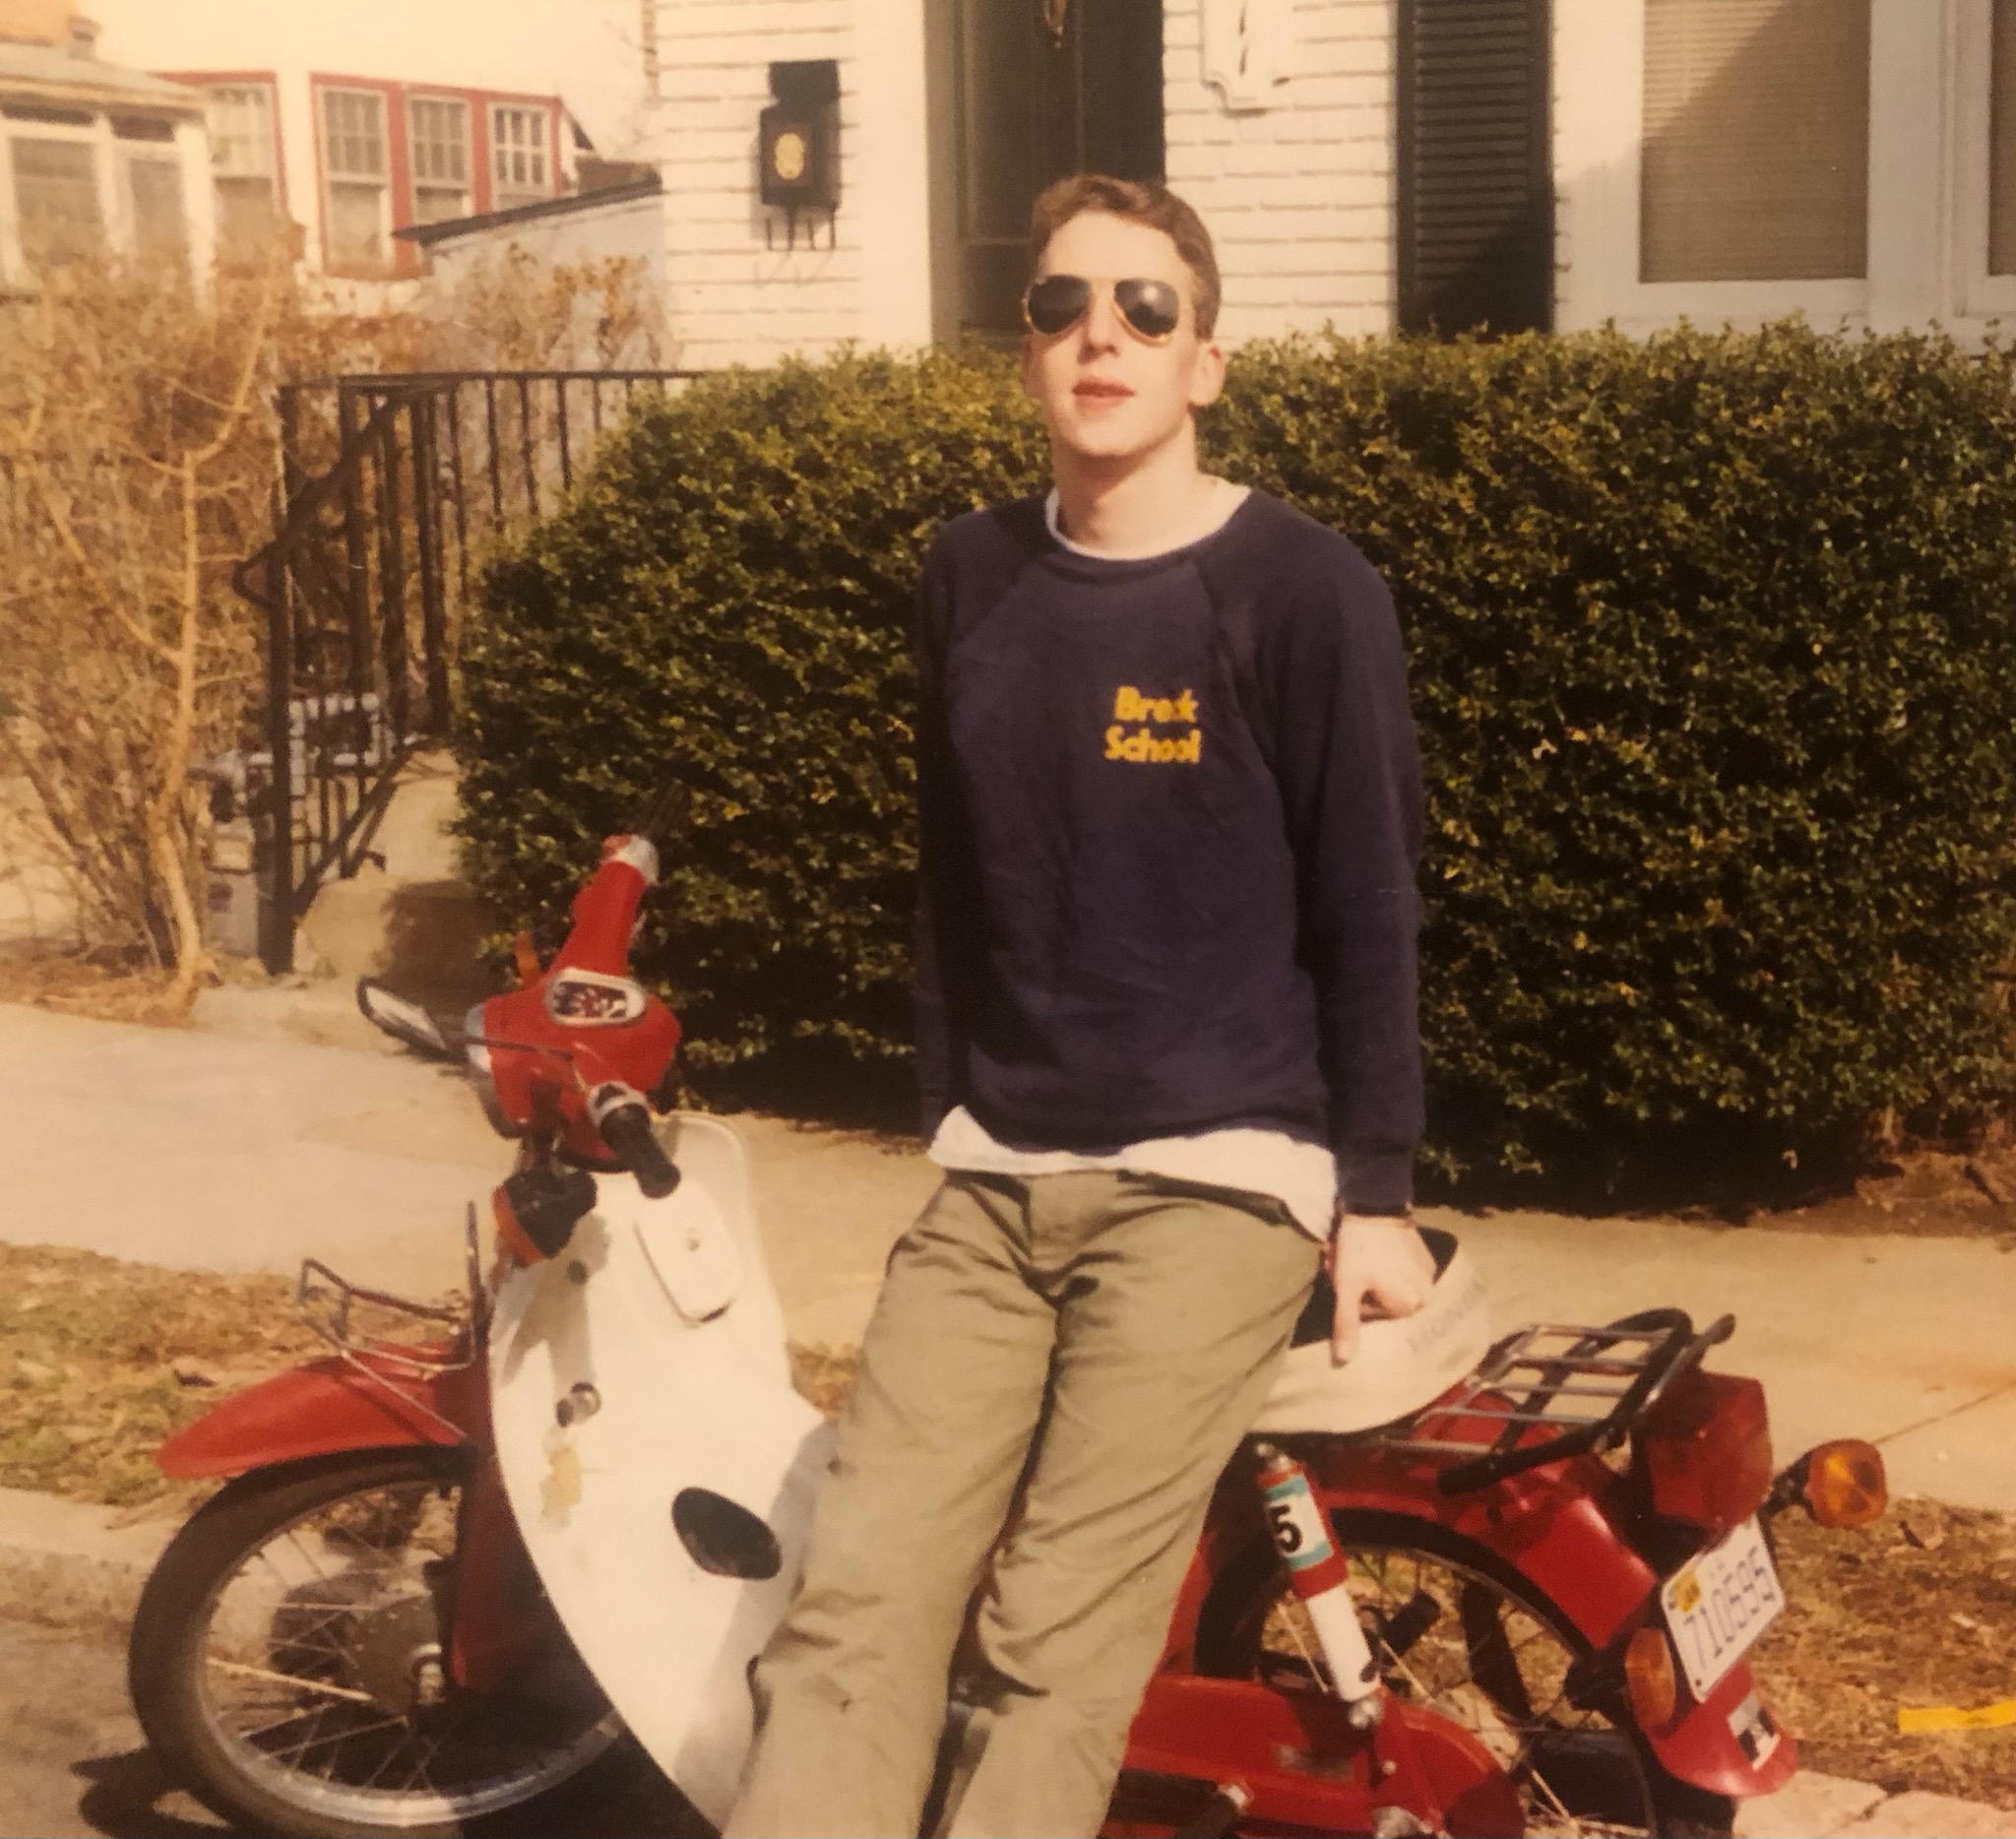 The author with his Honda Passport in the summer of 1988.